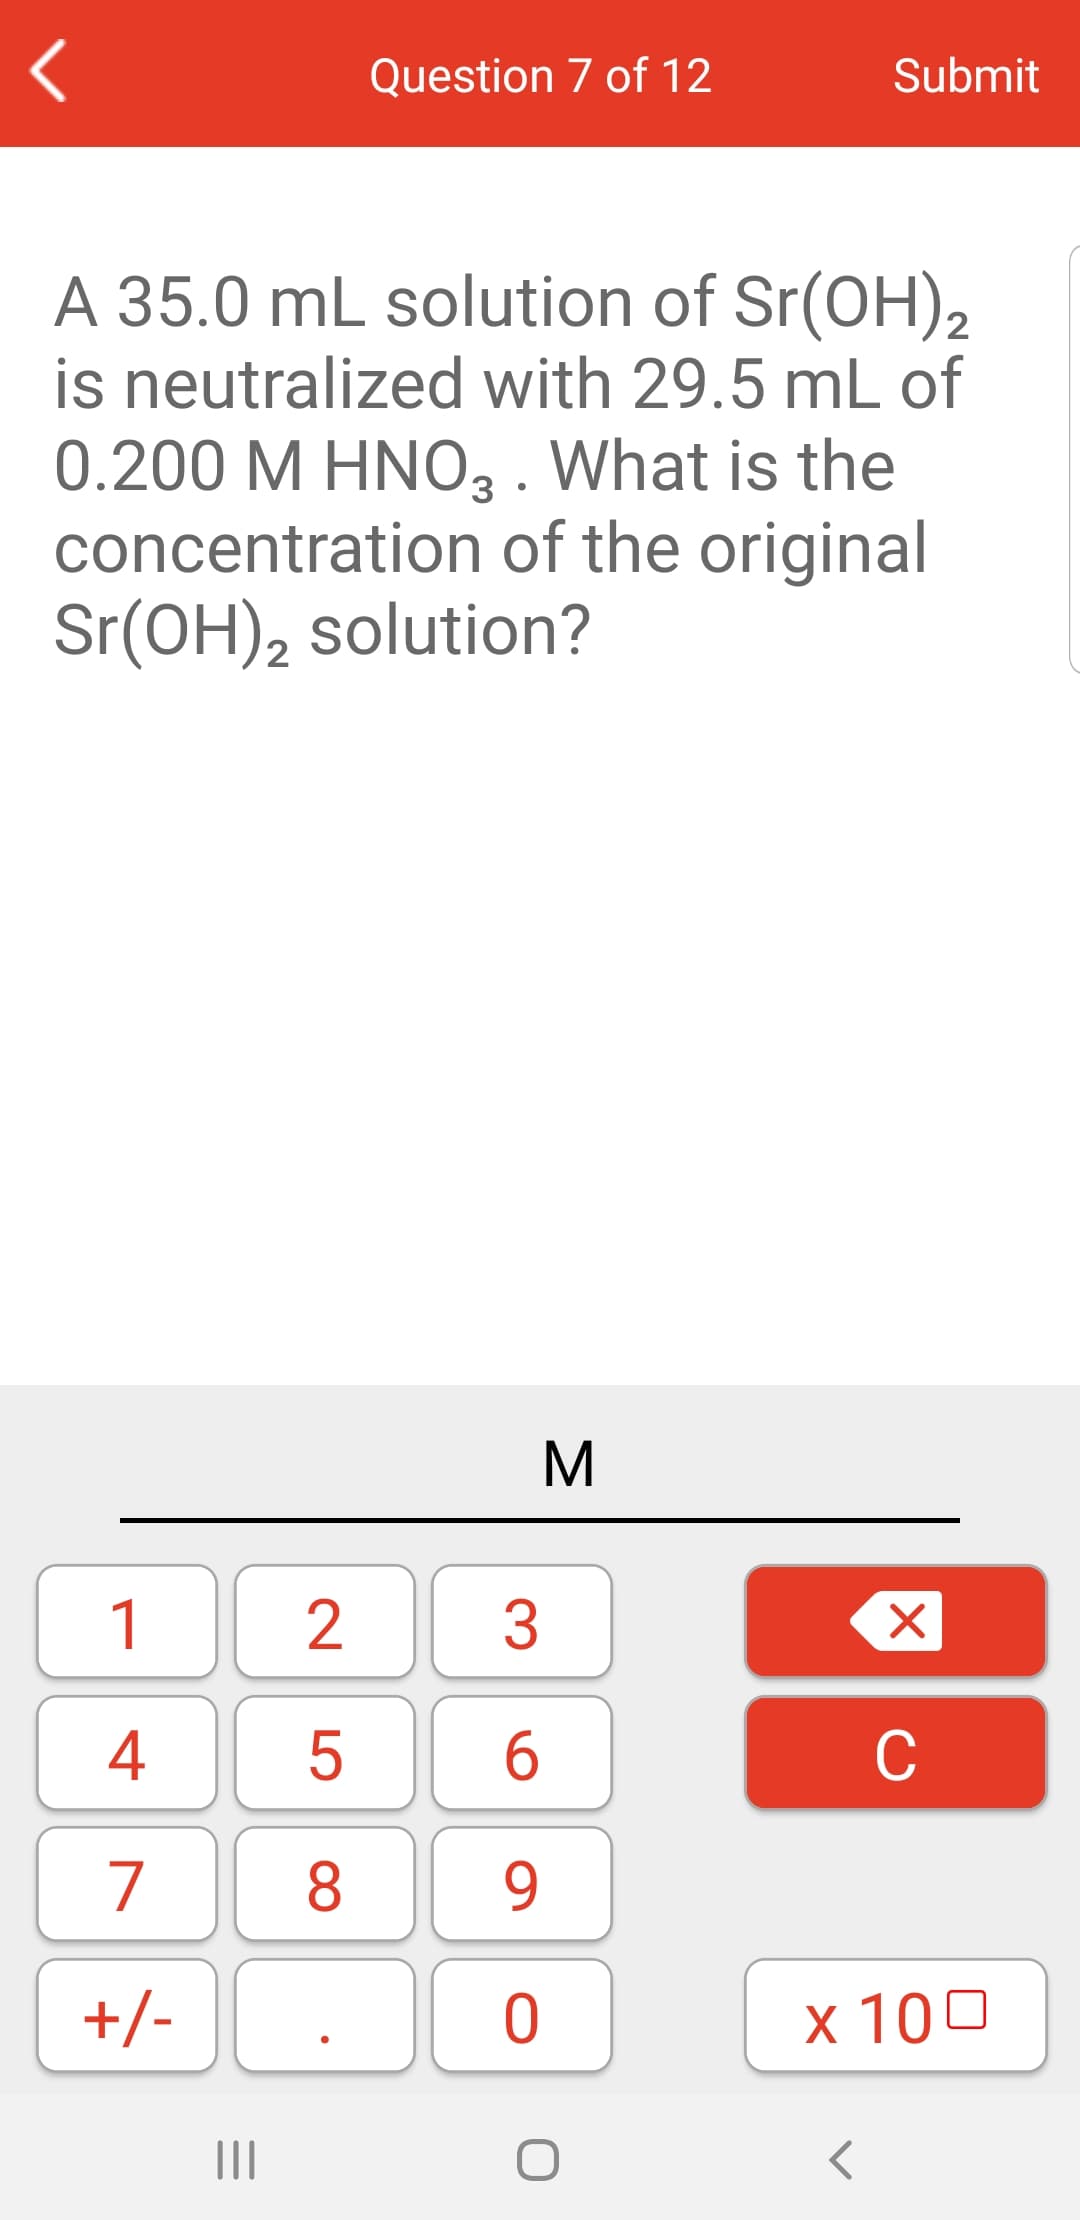 Question 7 of 12
Submit
A 35.0 mL solution of Sr(OH),2
is neutralized with 29.5 mL of
0.200 M HNO3 . What is the
concentration of the original
Sr(OH), solution?
2
M
1
2
3
4
C
7
8
9
+/-
х 100
II
|X
LO
